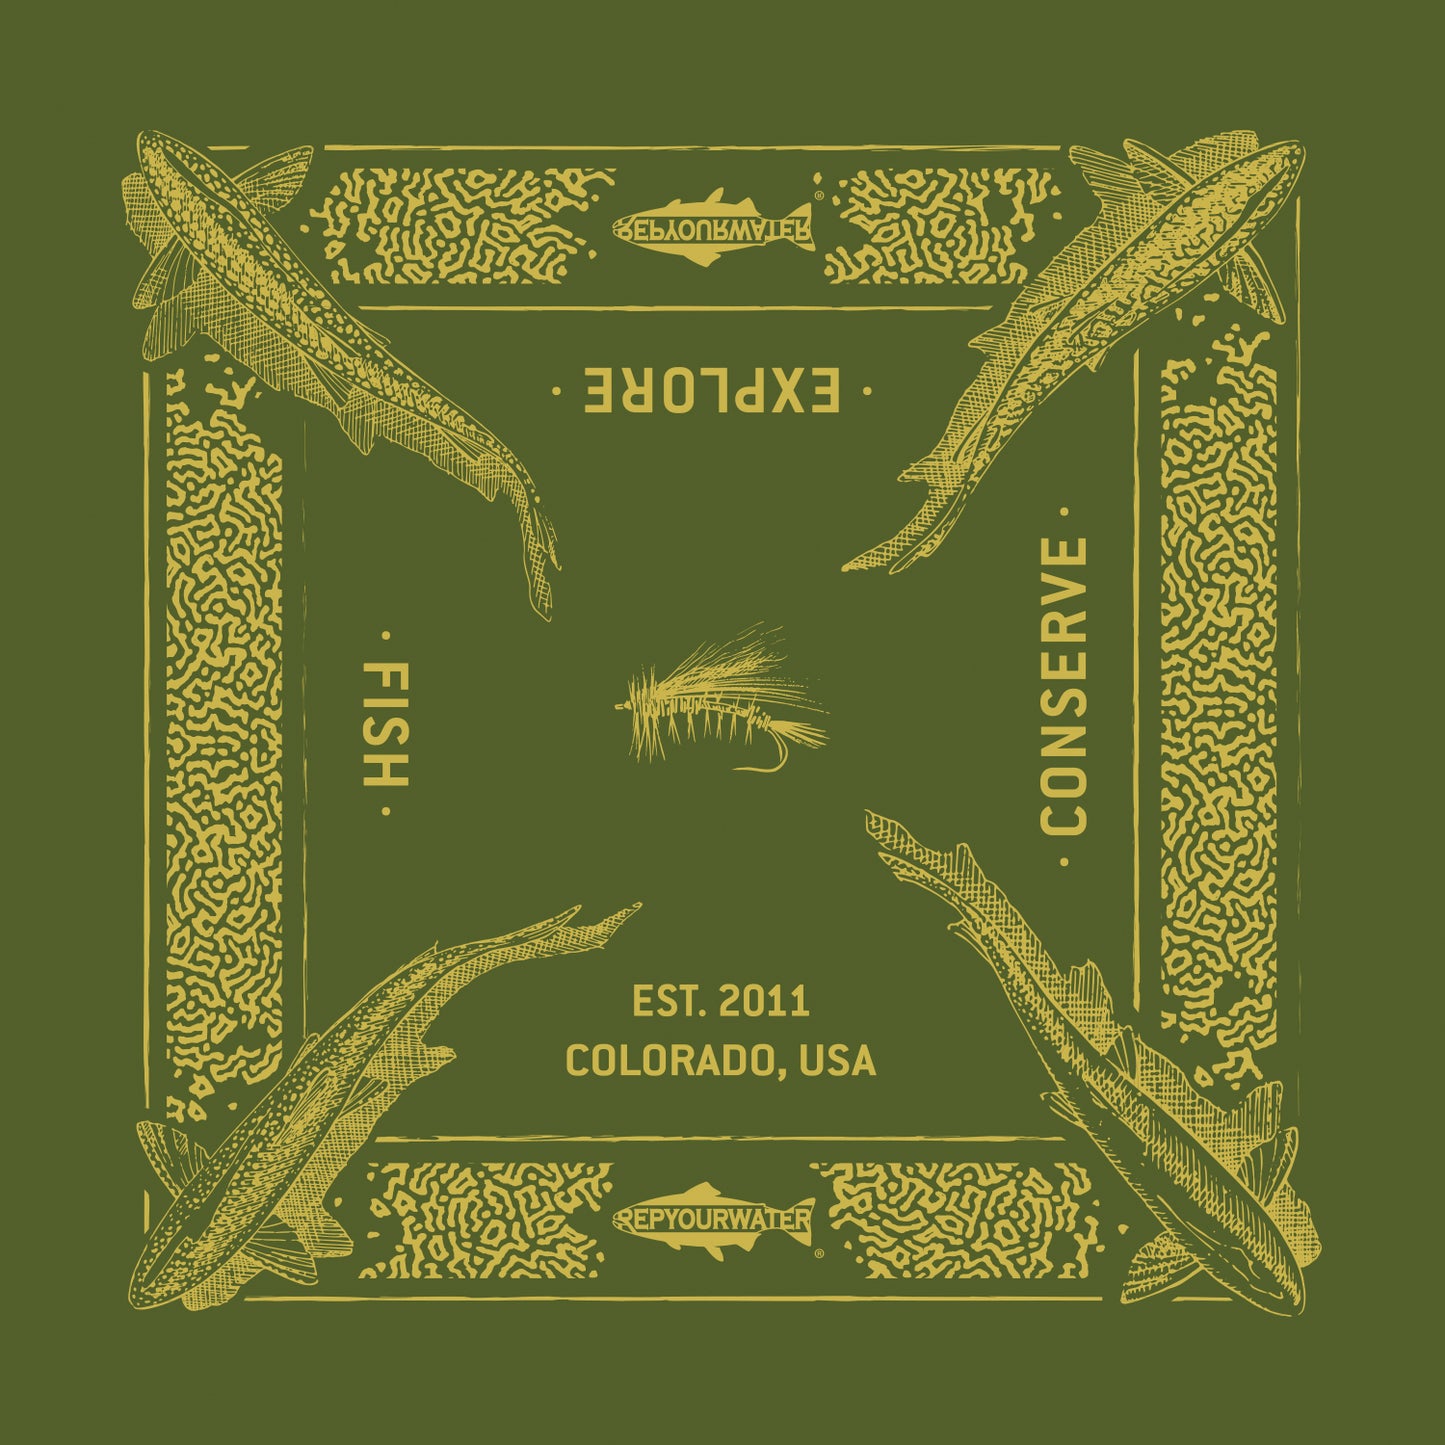 A bandana mockup shows a repeating pattern of trout from above in each color and a border imitating trout print.  There are two logos that read repyourwater inside a trout silhouette.  The words Fish explore conserve and est 2011 colorado USA are written. A  dry fly is in the middle.  The bandana is green